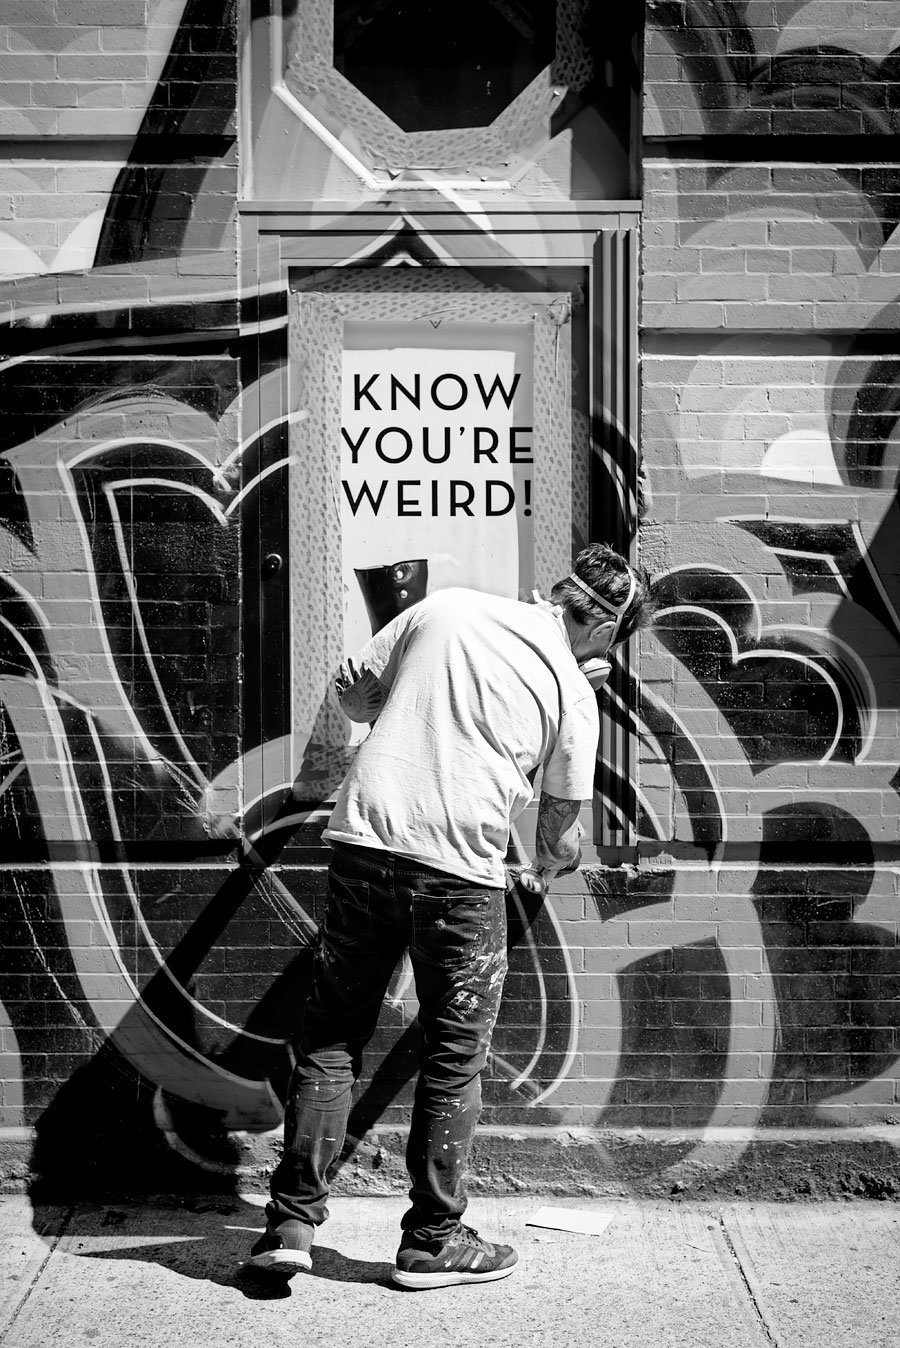 Know you're weird! More New York moments in black & white on Urban Pixxels: http://urbanpixxels.com/new-york-bw 